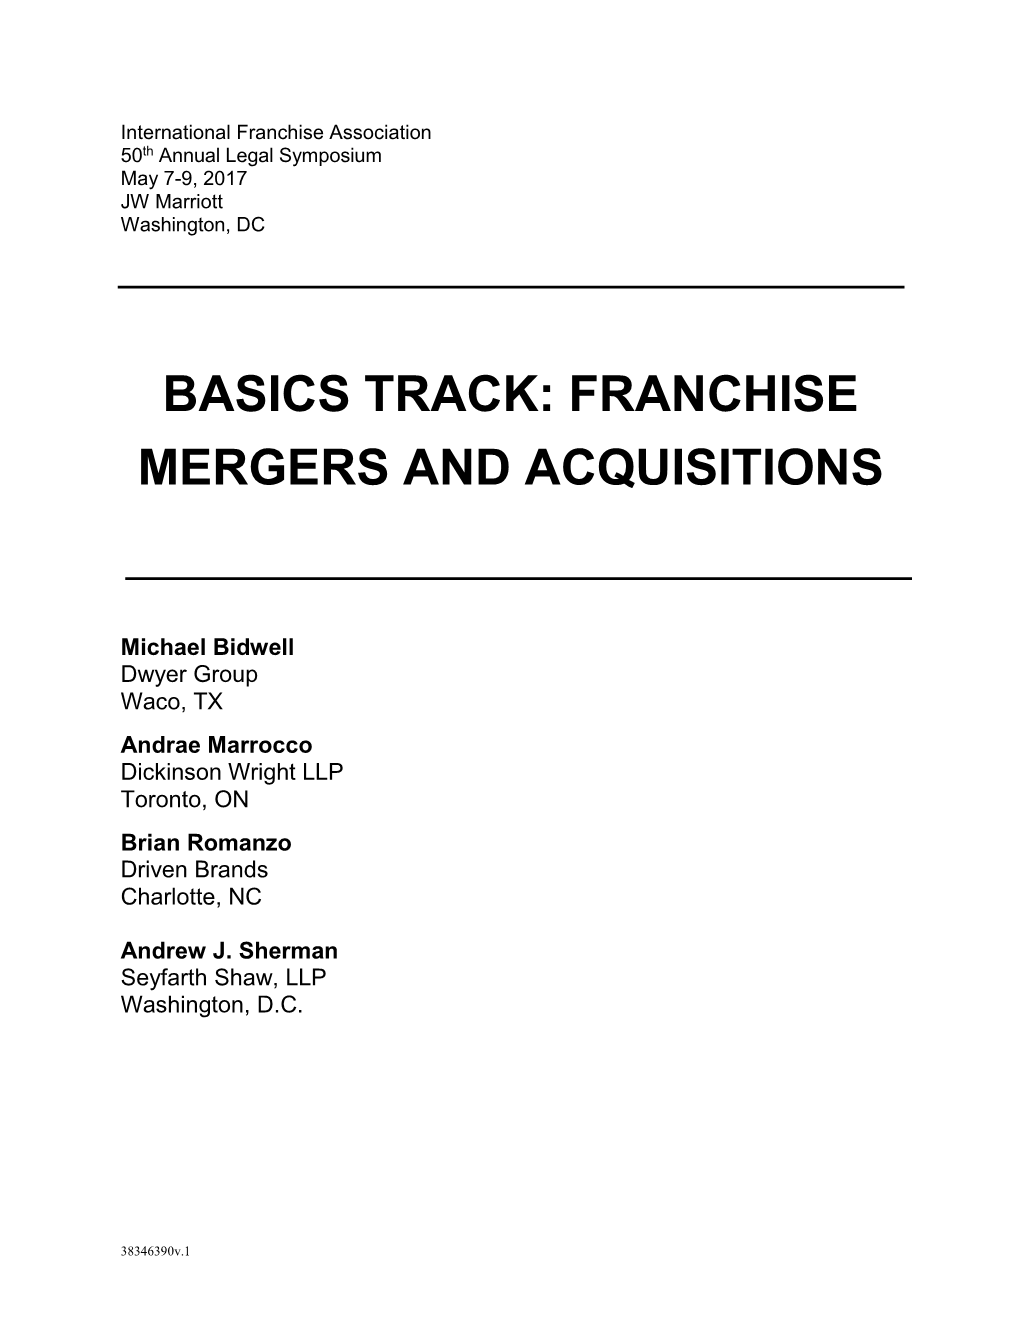 Basics Track: Franchise Mergers and Acquisitions